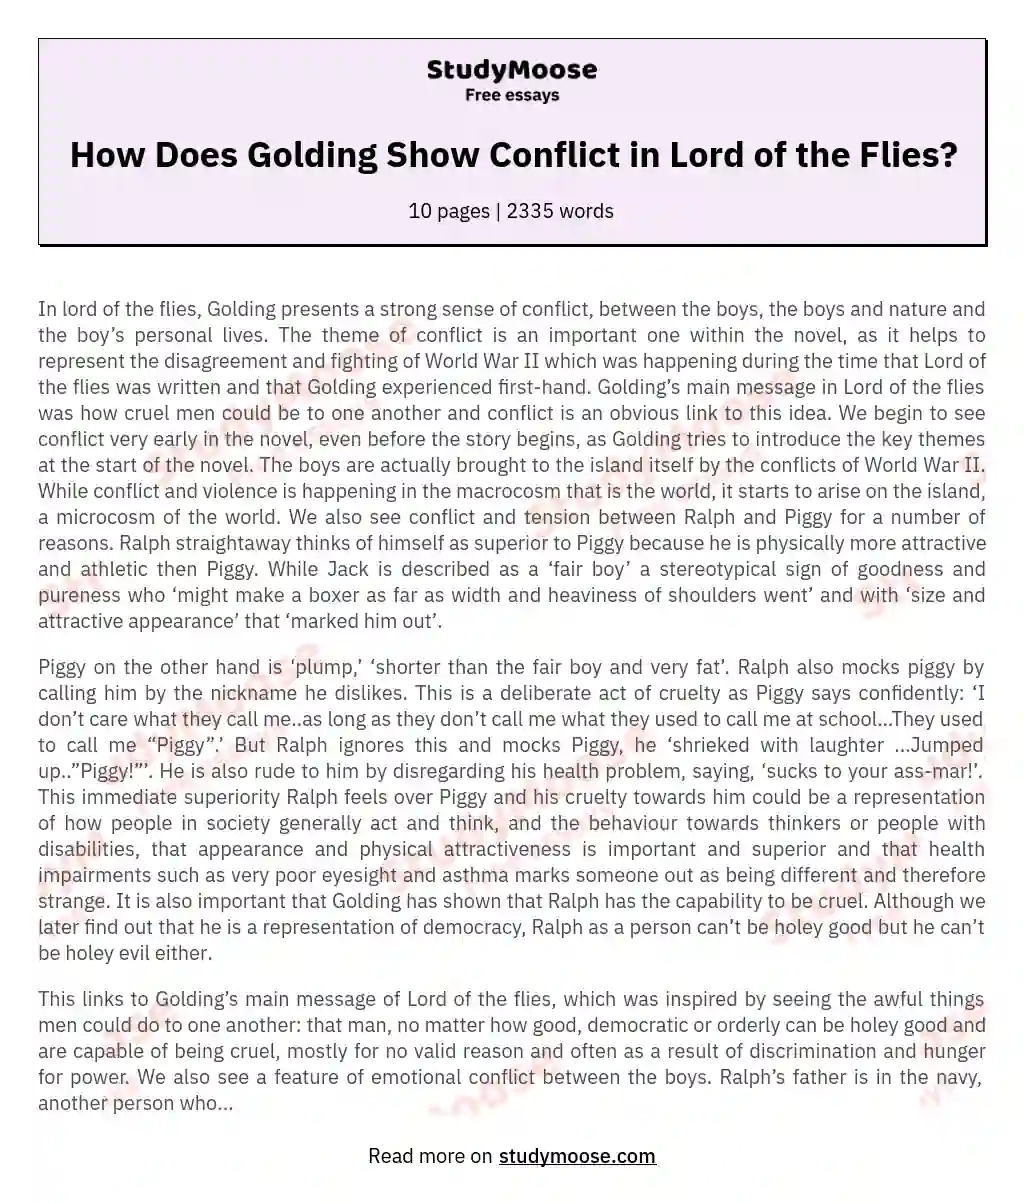 How Does Golding Show Conflict in Lord of the Flies? essay